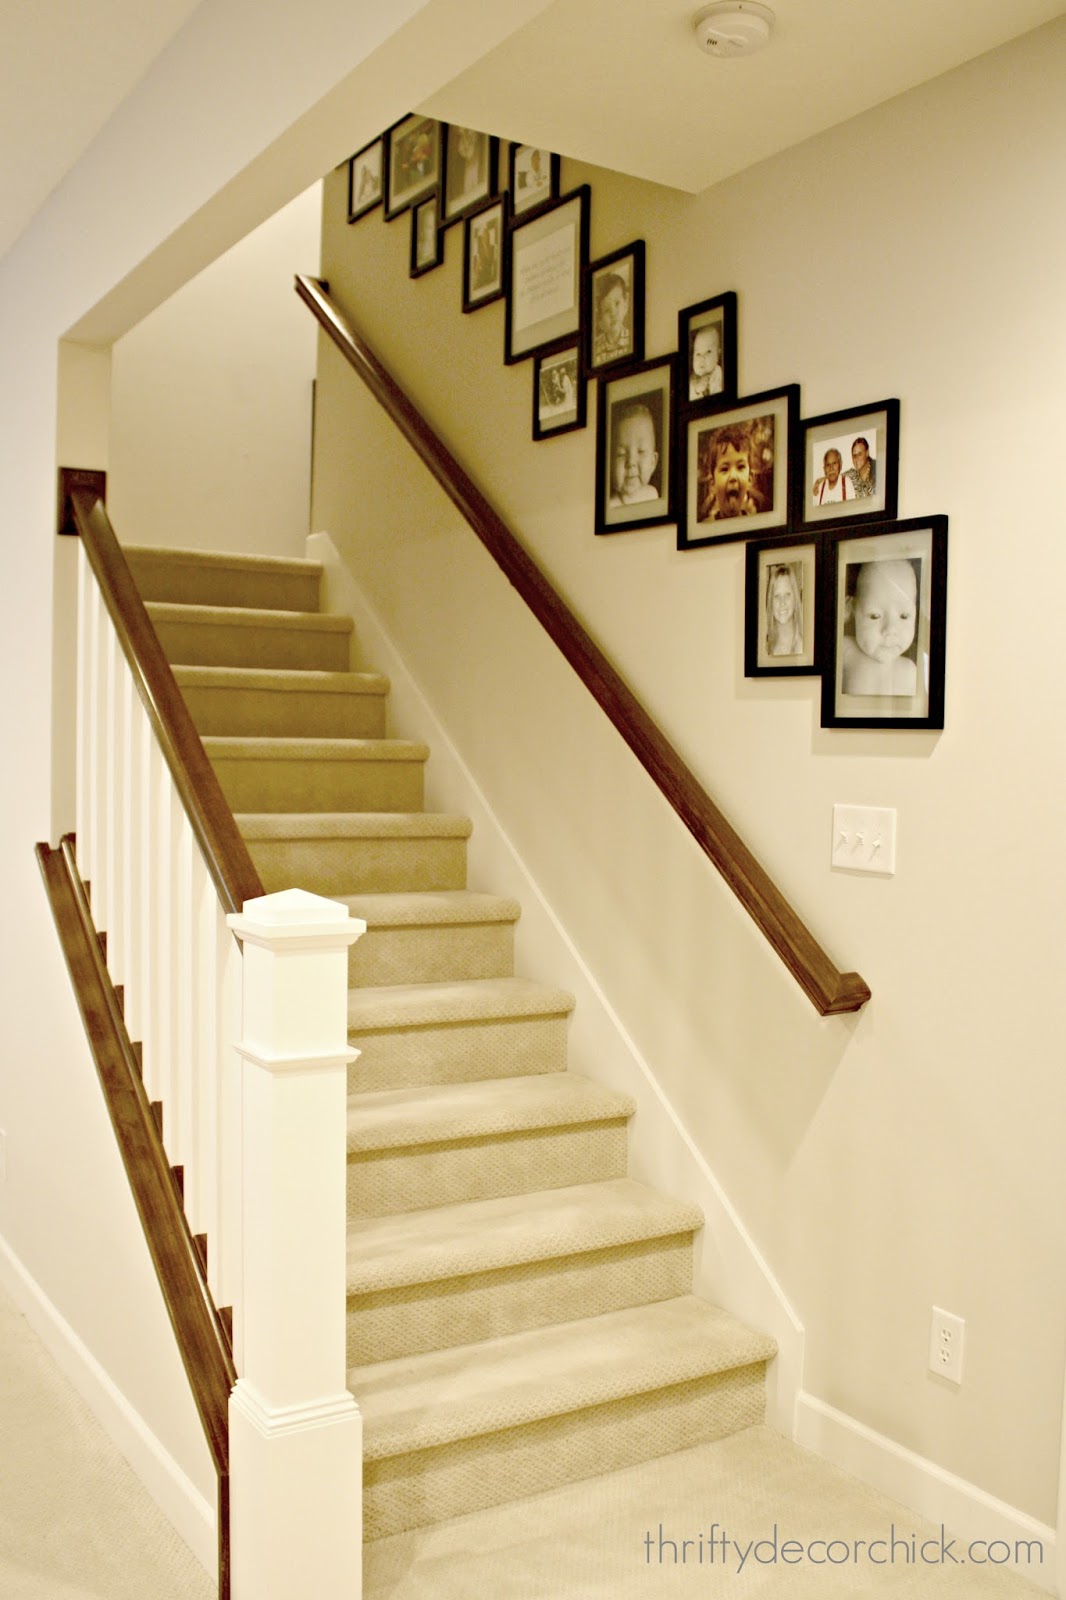 Create A Gallery Wall In 7 Simple Steps - Photo Wall